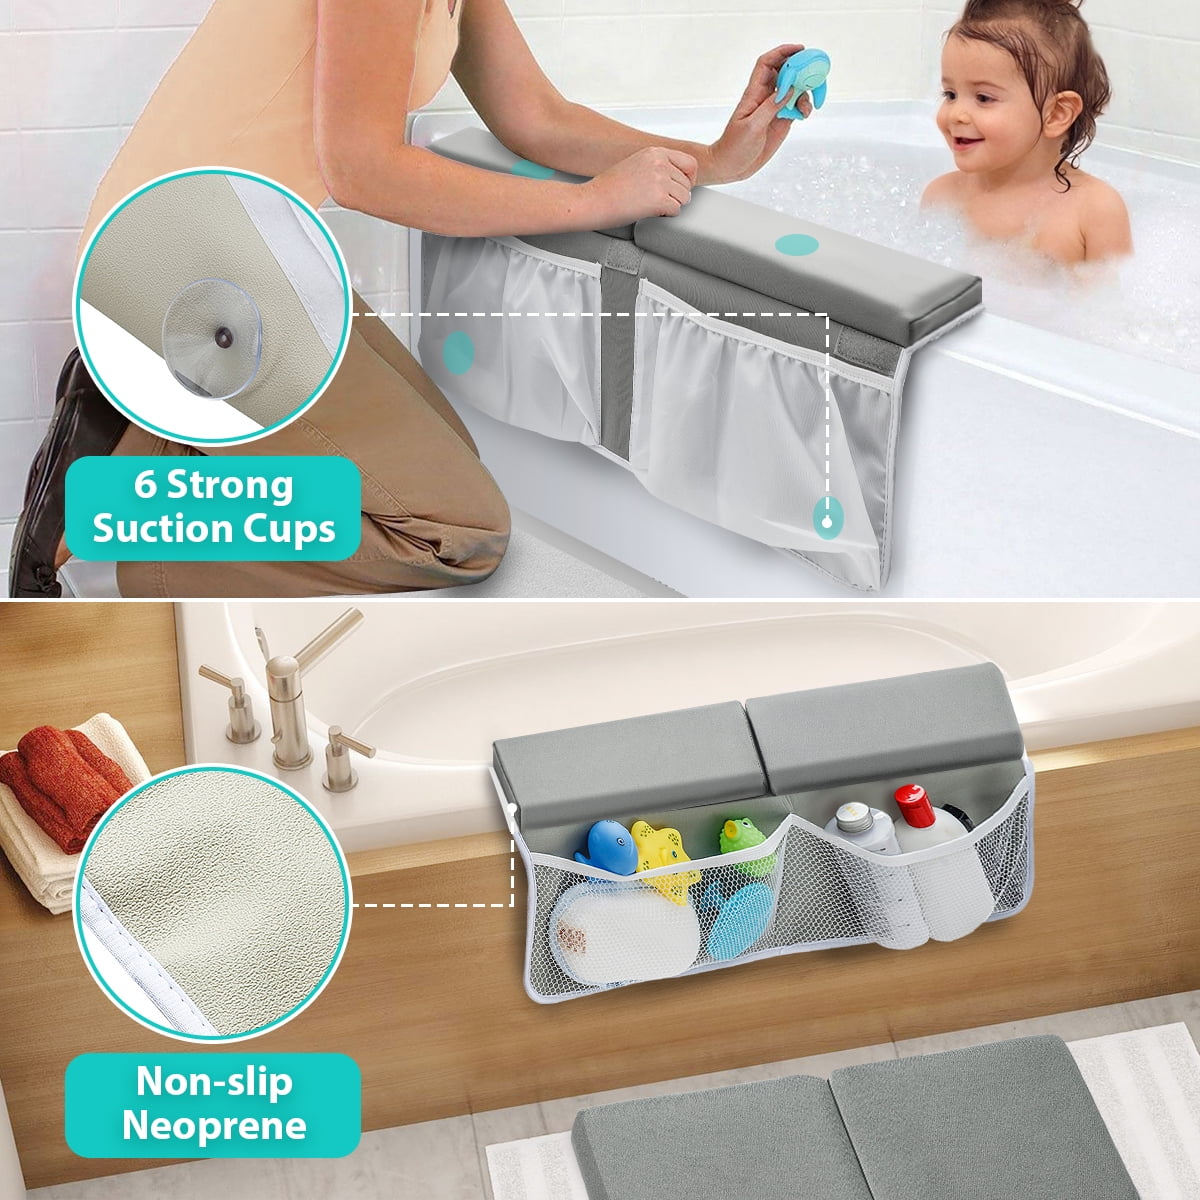 1.5 Thick Quickly Dry Kneeling Pad and Elbow Support for Knee & Arm Support Large Bathtub Kneeling Mat with Toy Organizer for Happy Baby Bathing Time beiens Bath Kneeler with Elbow Rest Set Blue 